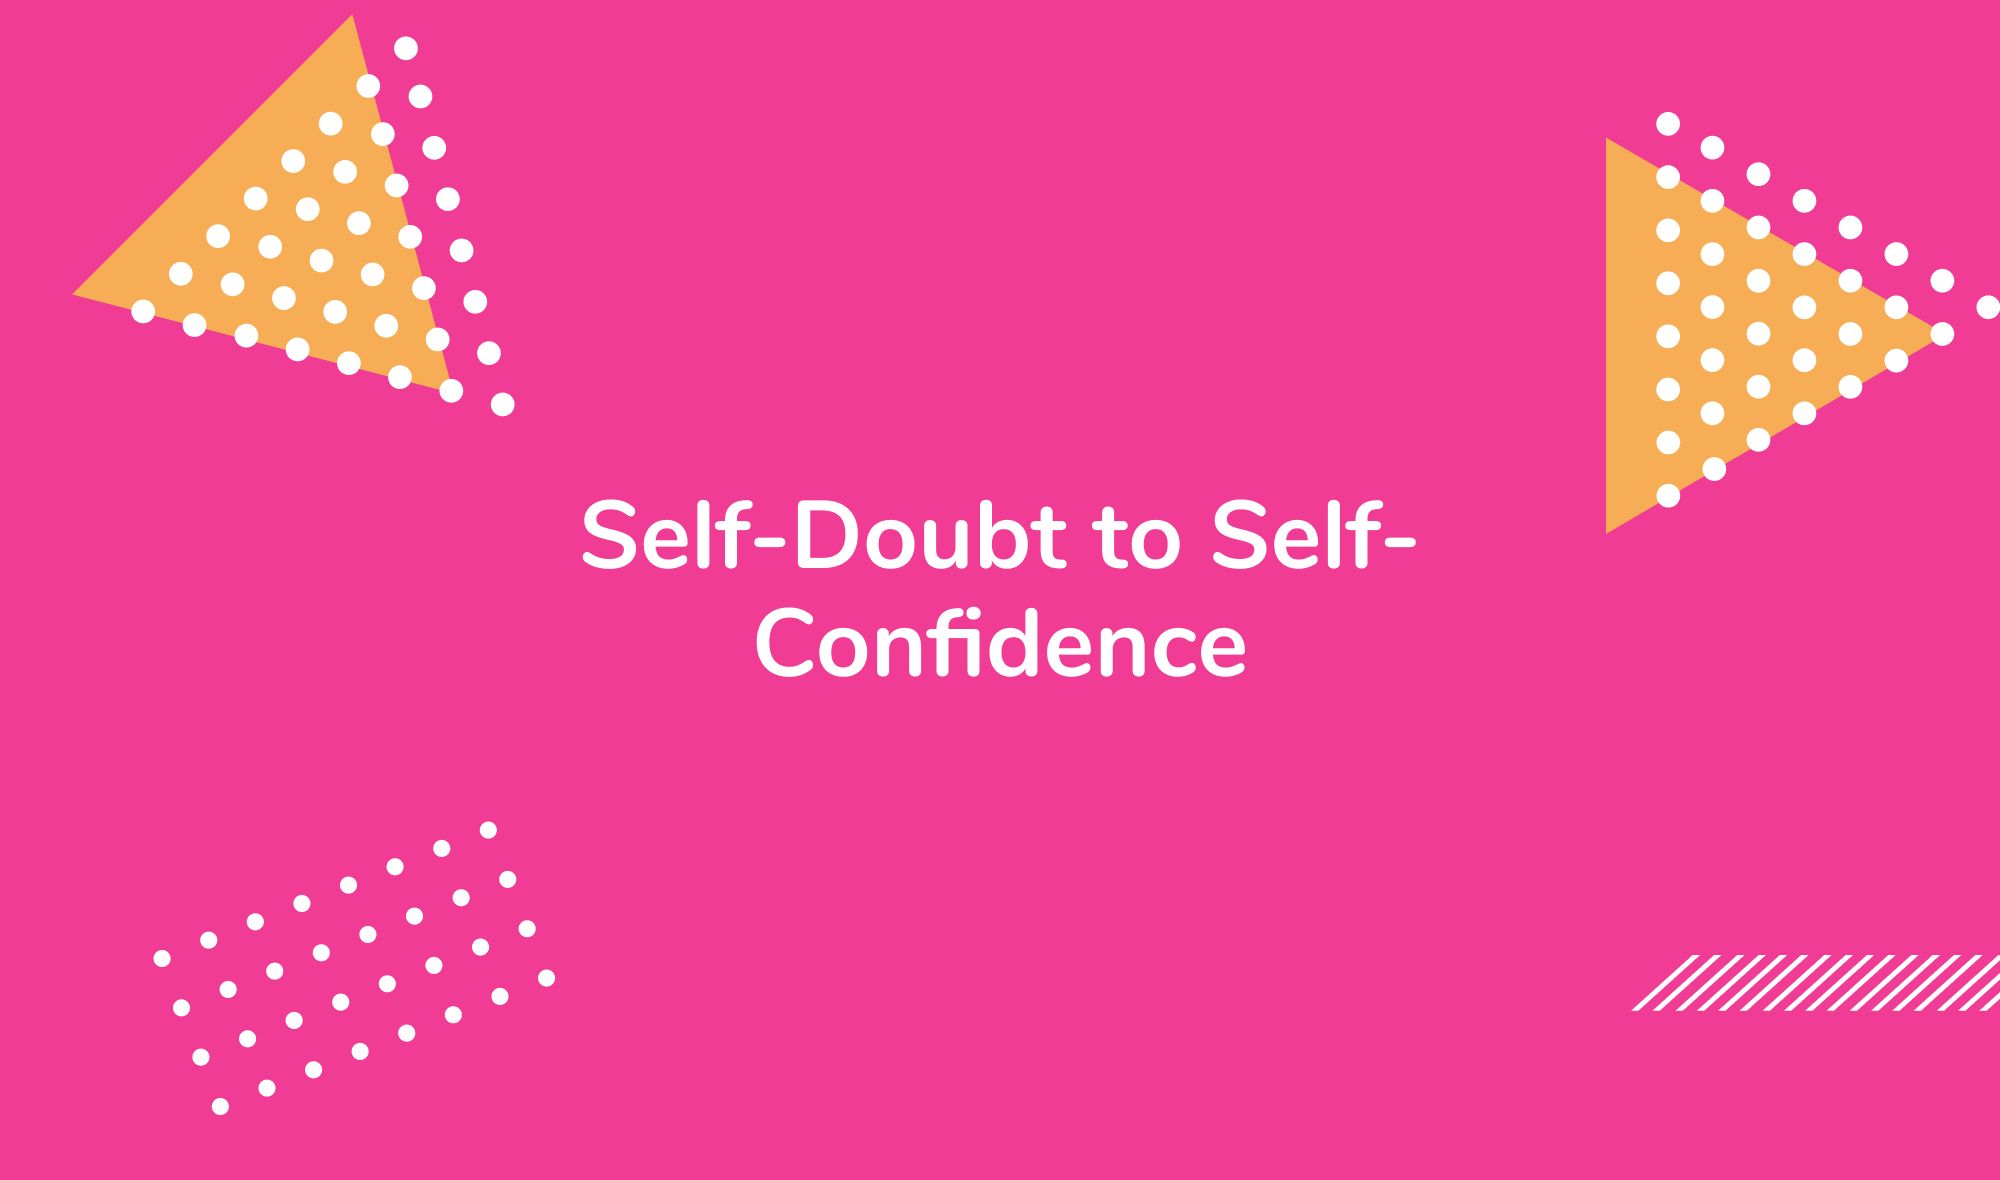 Conclusion: From Self-Doubt to Self-Confidence